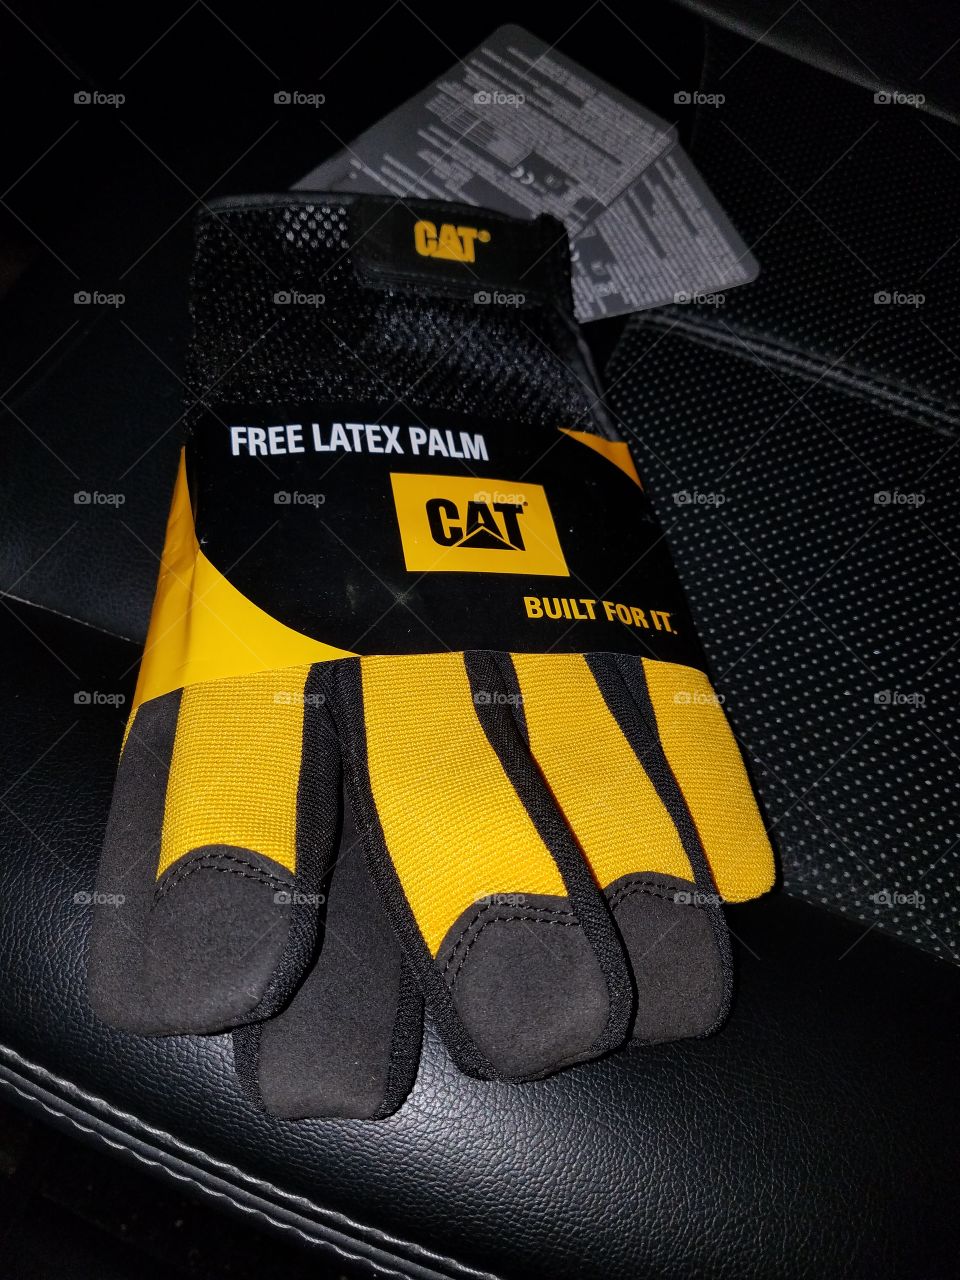 New pair of typical workers gloves.